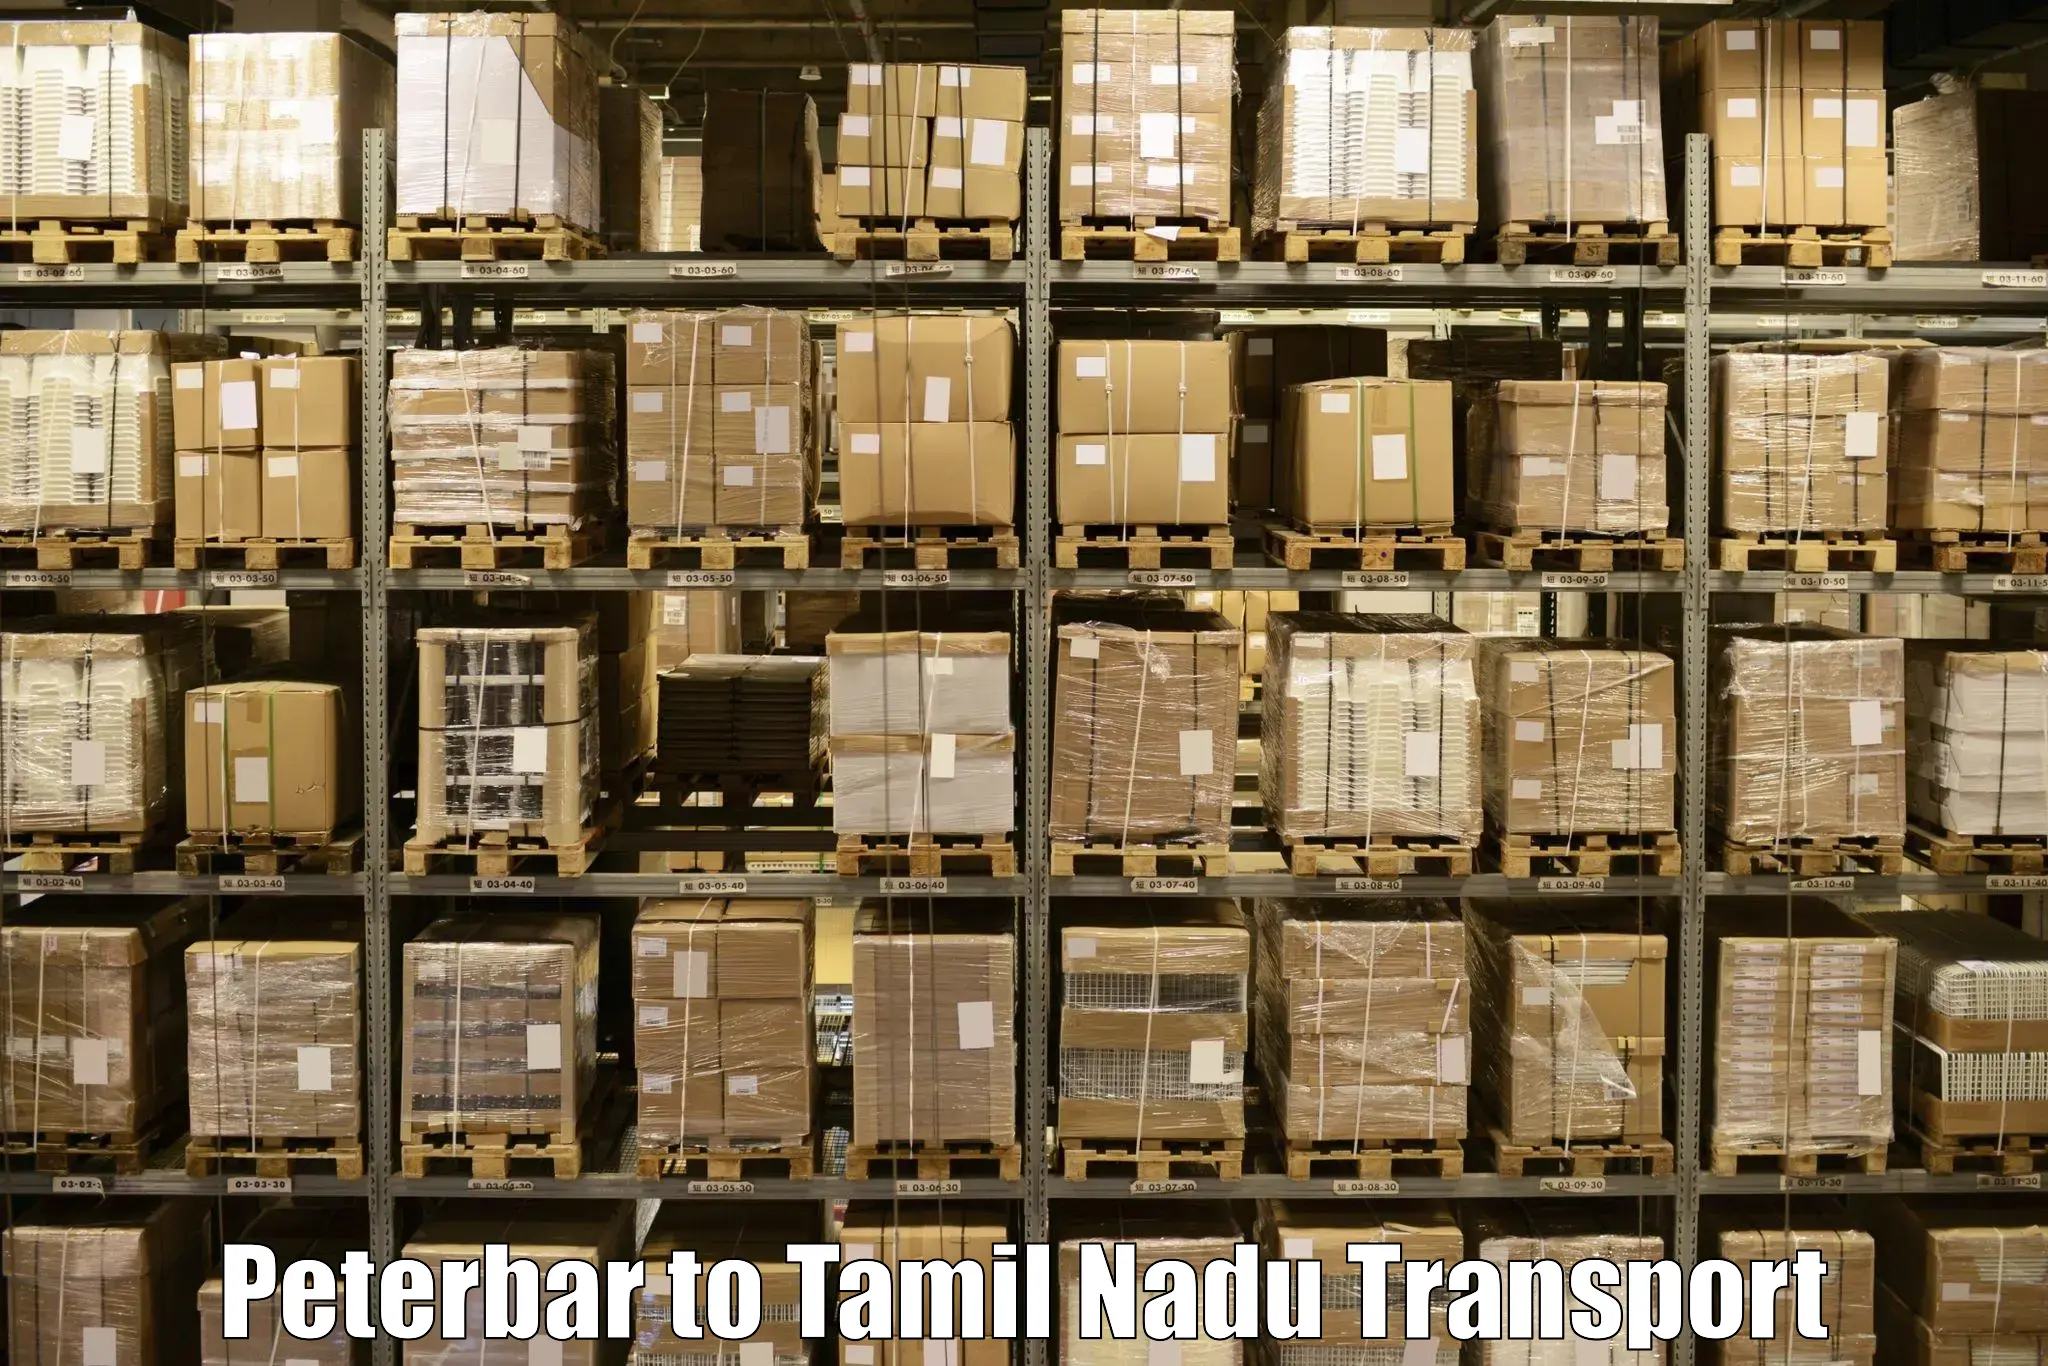 Goods delivery service Peterbar to Udagamandalam